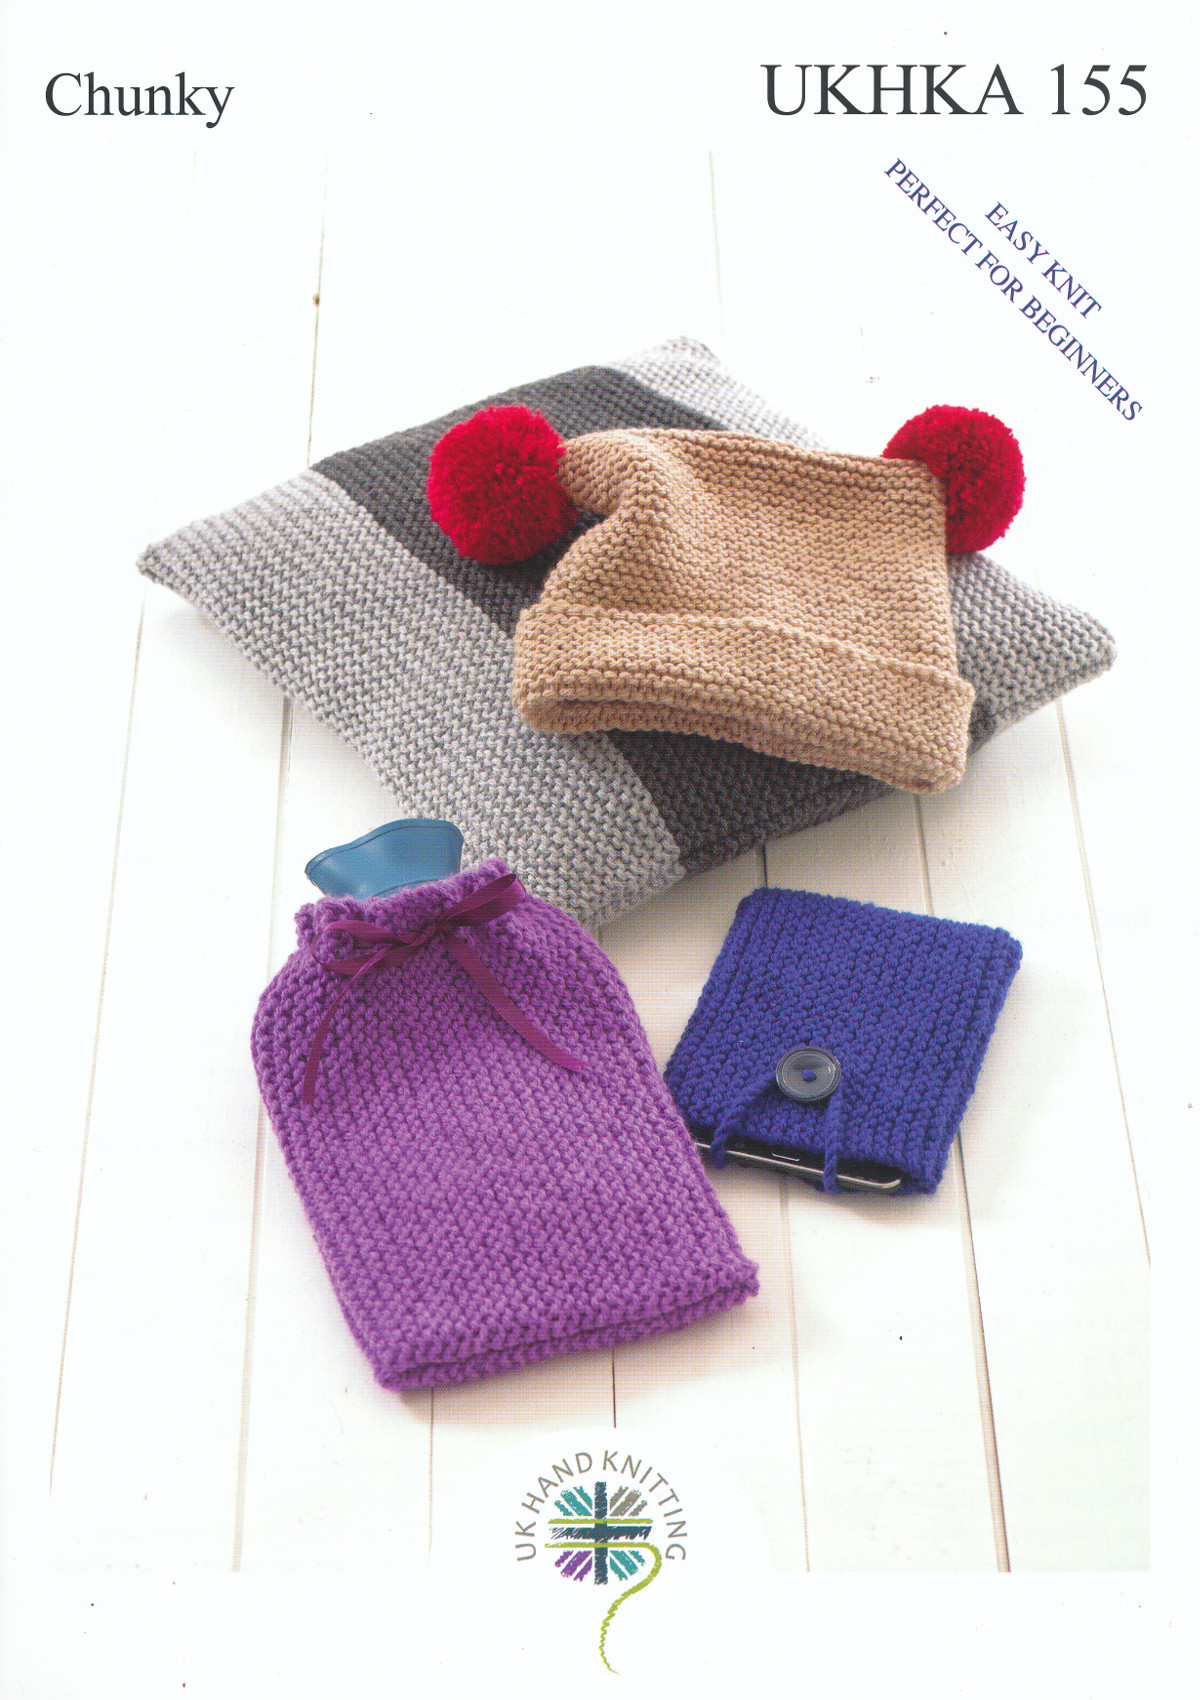 Free Cushion Cover Knitting Pattern Details About Chunky Knitting Pattern Hat Cushion Hot Water Bottle Tablet Covers Ukhka 155